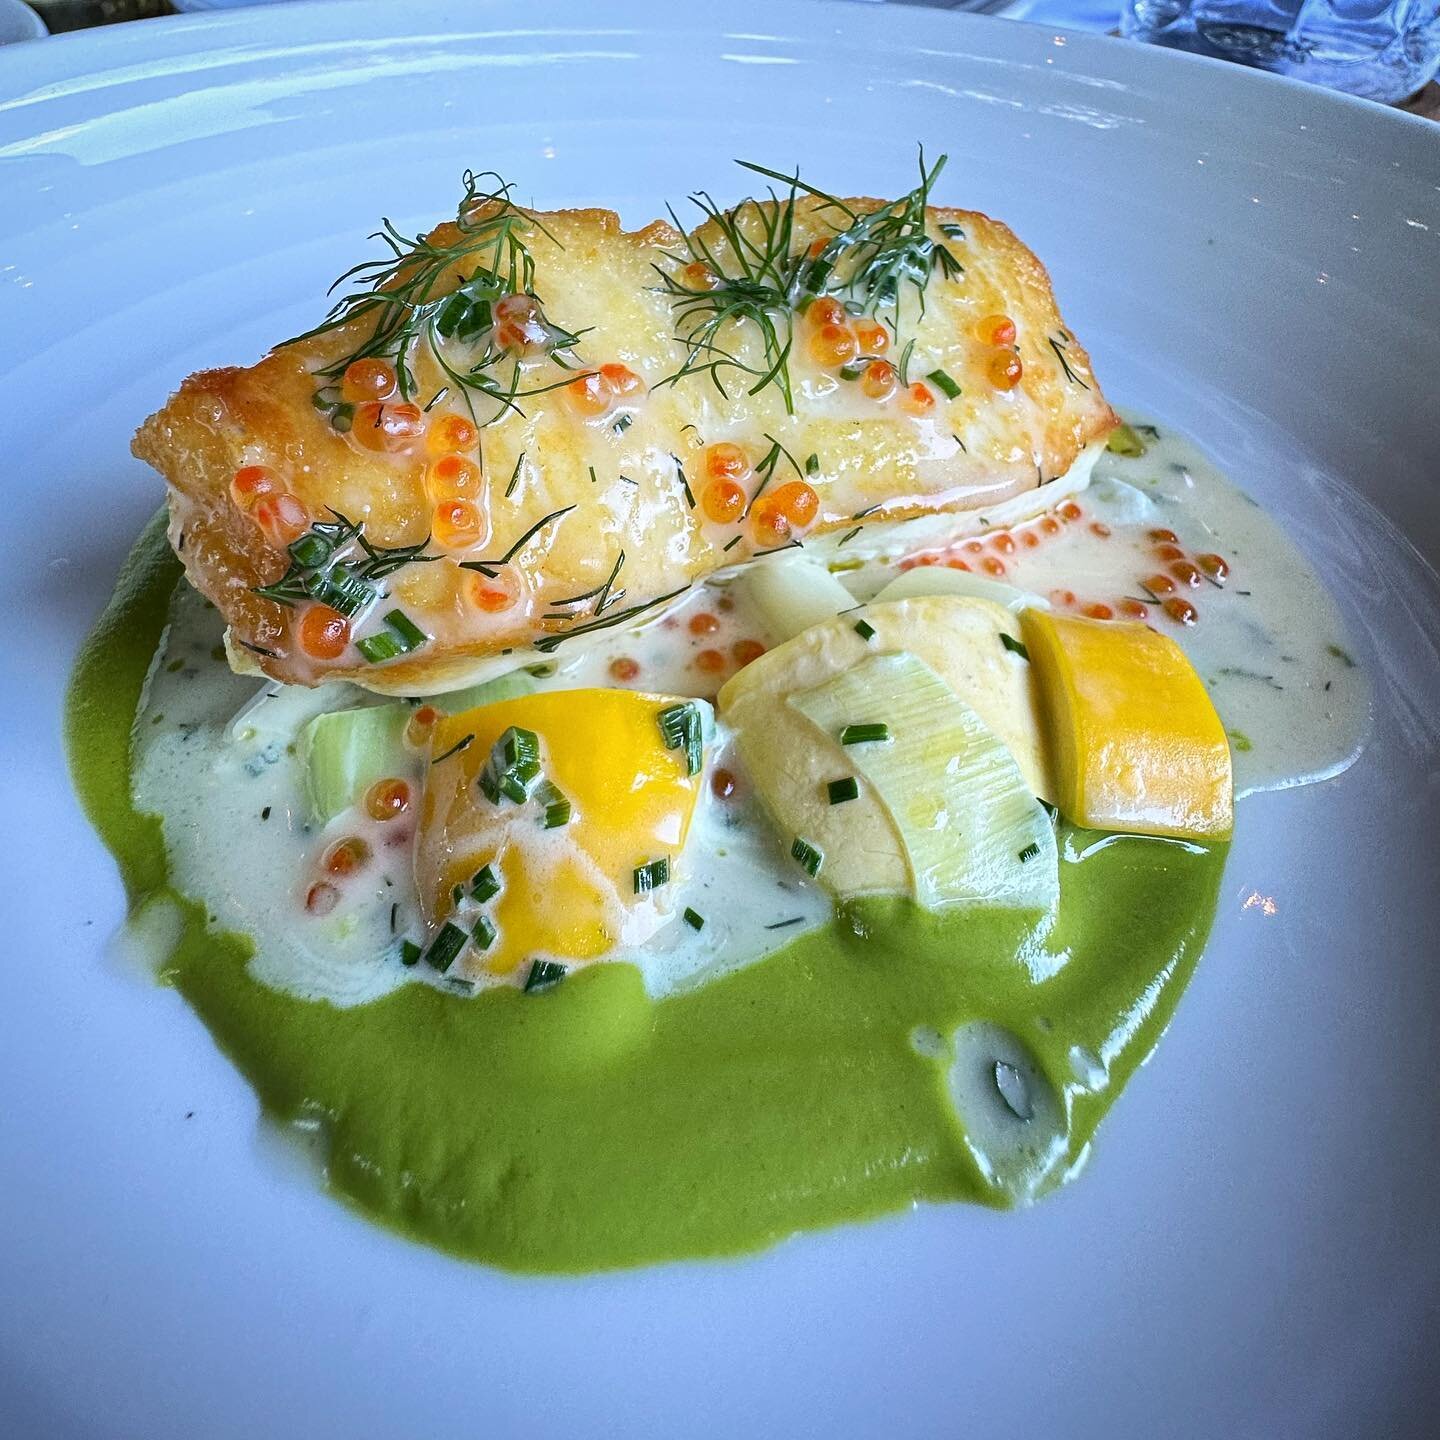 Amazing halibut at @thechastainatl 🐟🔥 What a perfect spot to enjoy before a concert at Chastain Park! #atl #atlanta #chastainpark #thechastain #food #foodatlanta